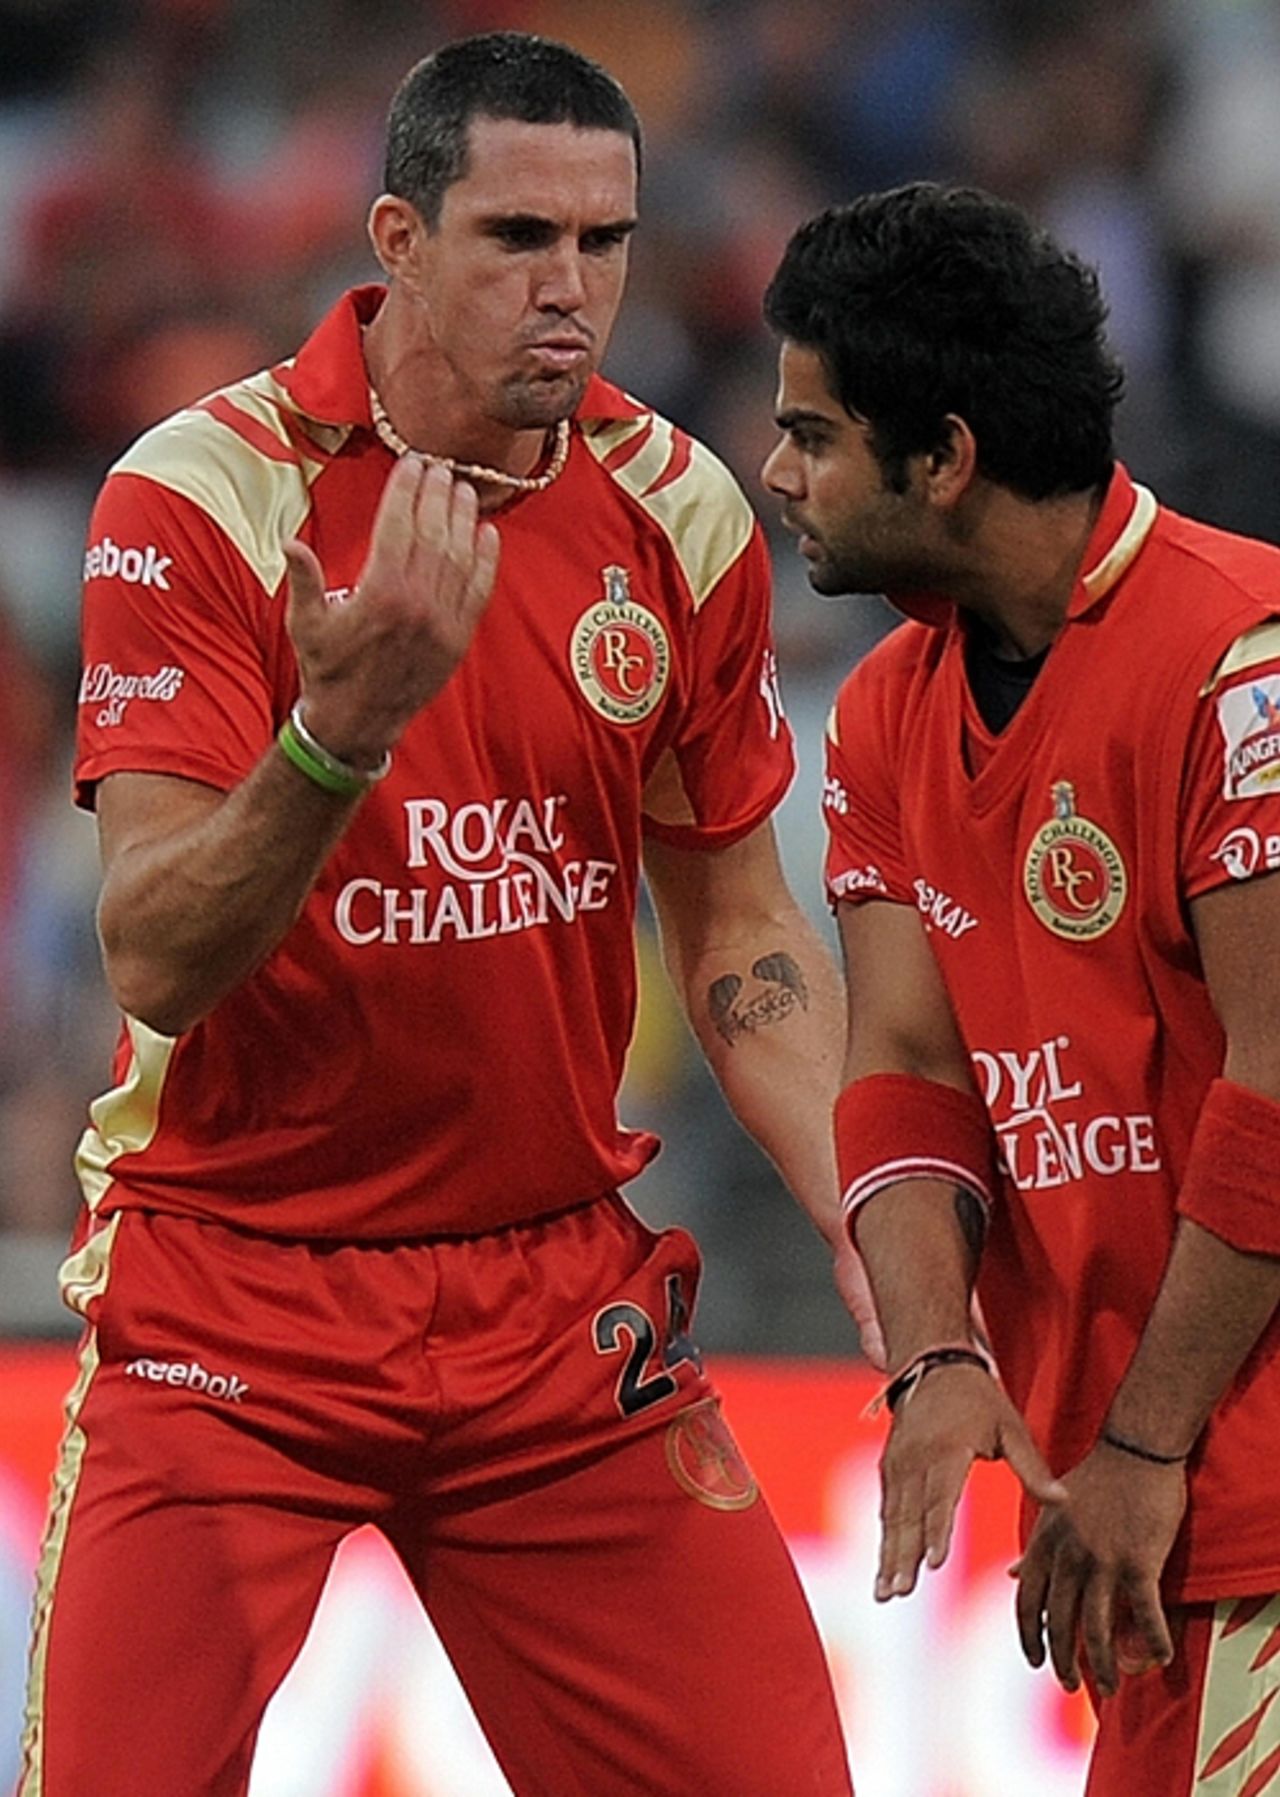 Kevin Pietersen celebrates the dismissal of Scott Styris, Bangalore Royal Challengers v Deccan Chargers, IPL, 8th game, Cape Town, April 22, 2009